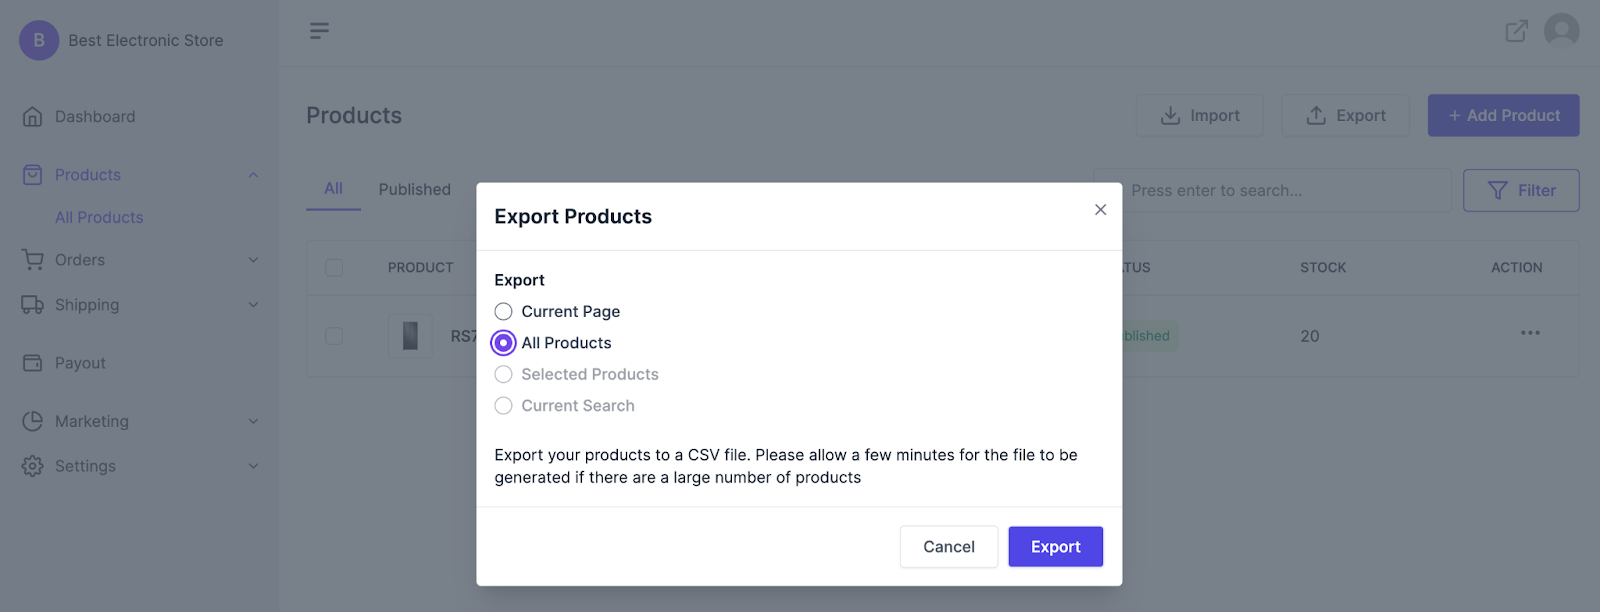 This image shows how to export all products